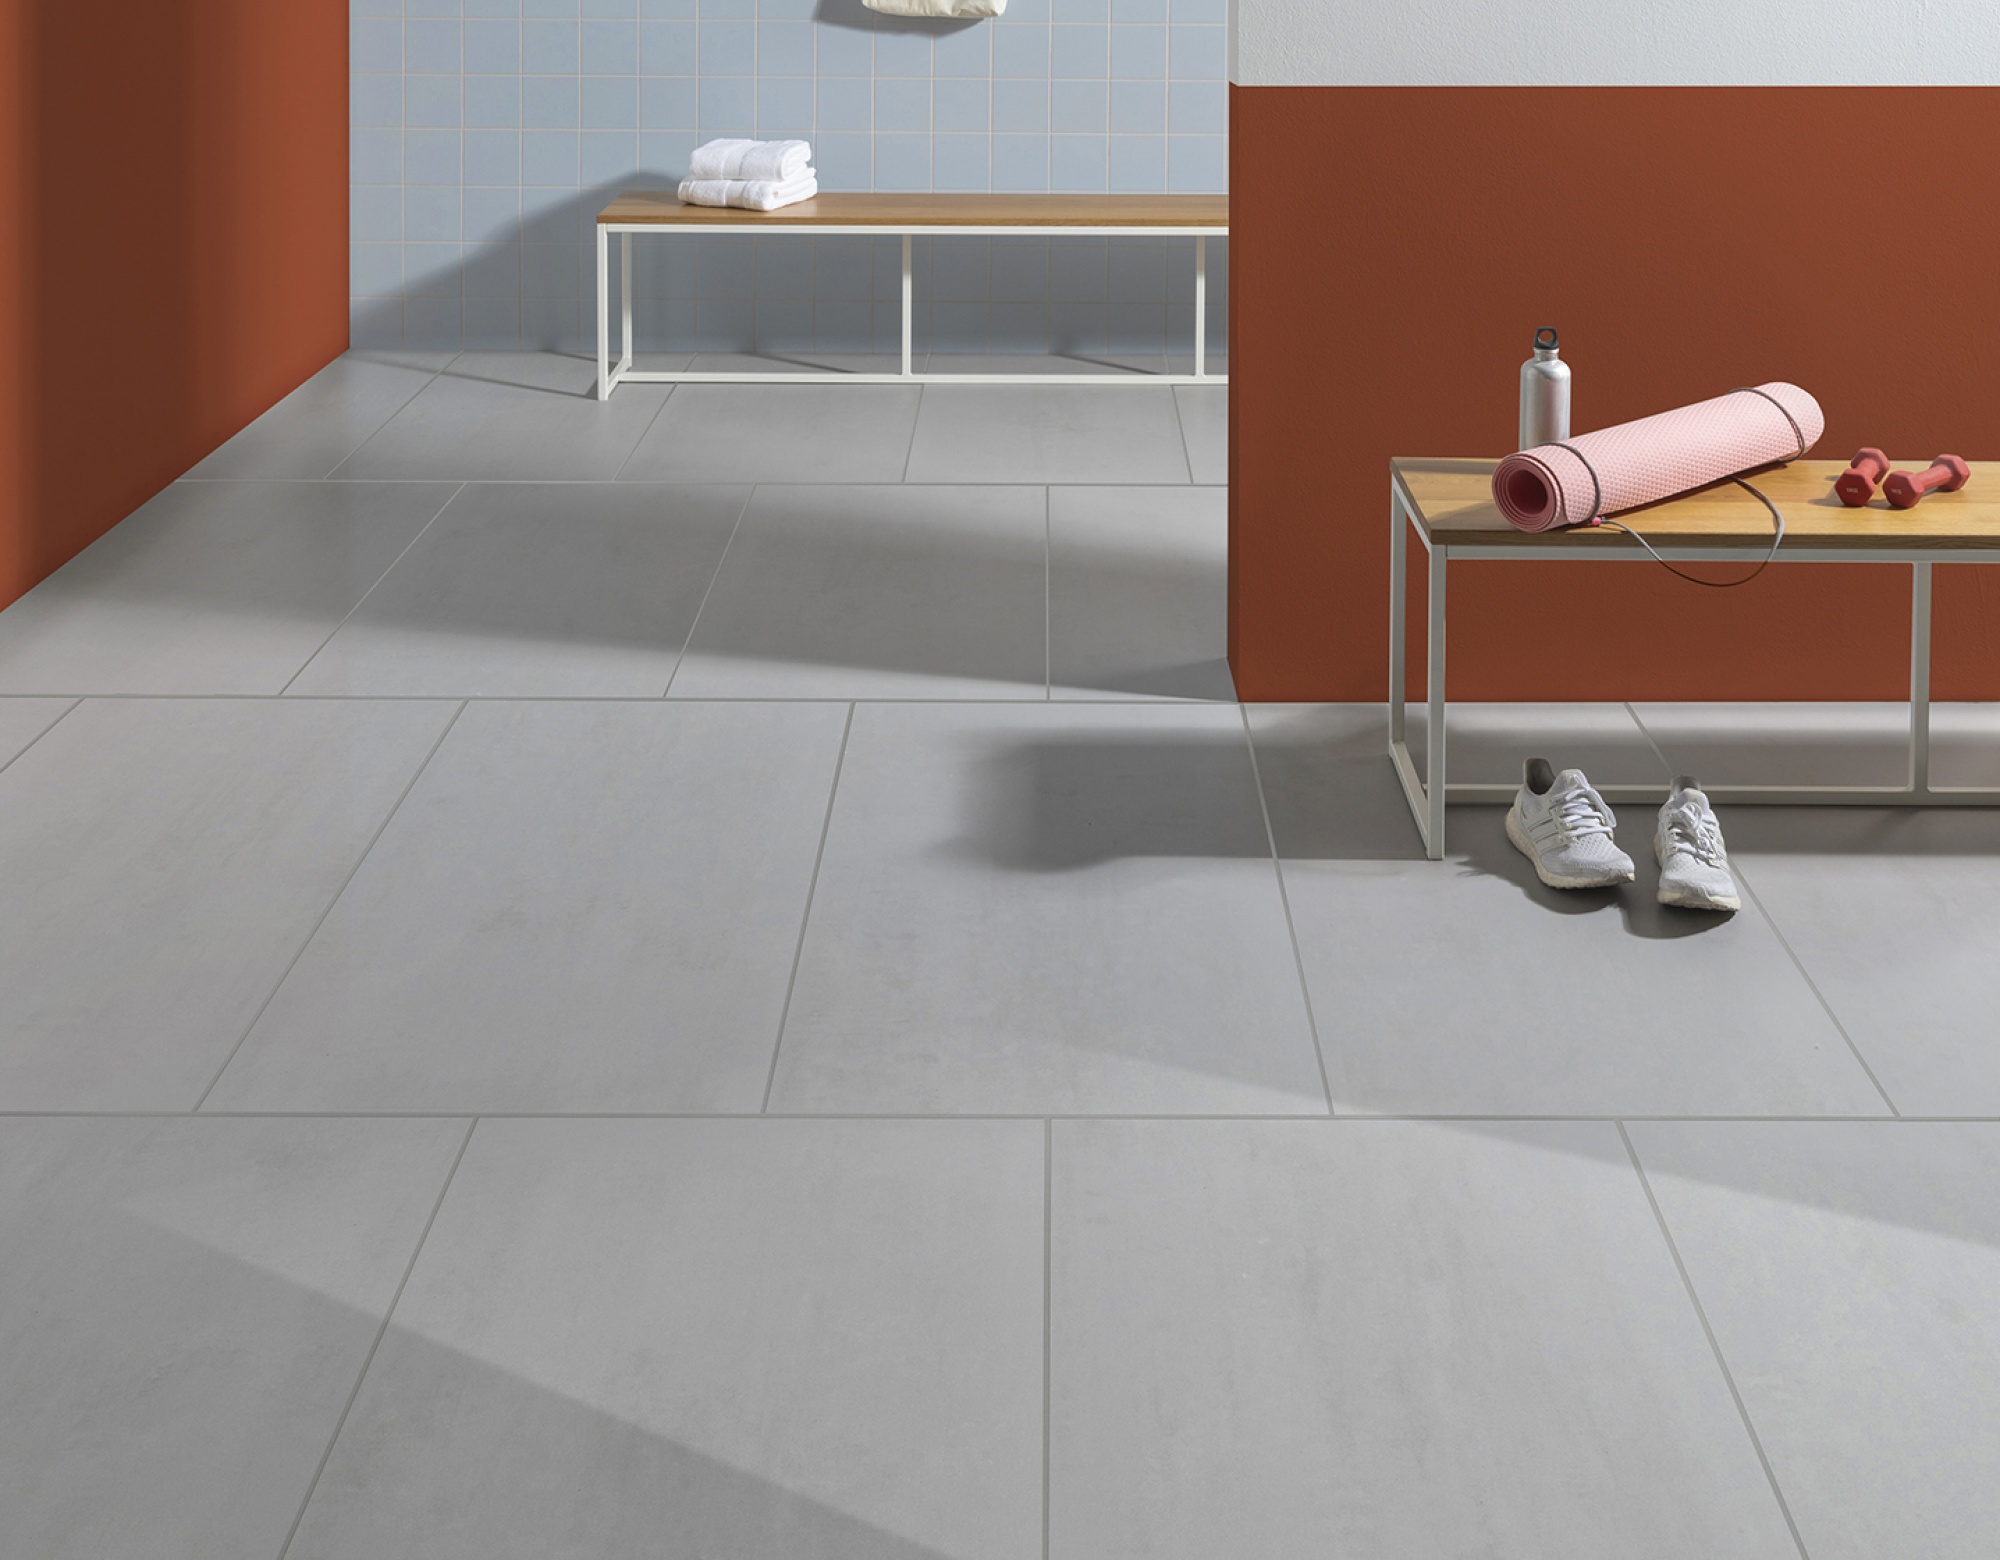 Core Collection Terra S Mosa, 12 215 24 Floor Tile Layout Patterns 6 X